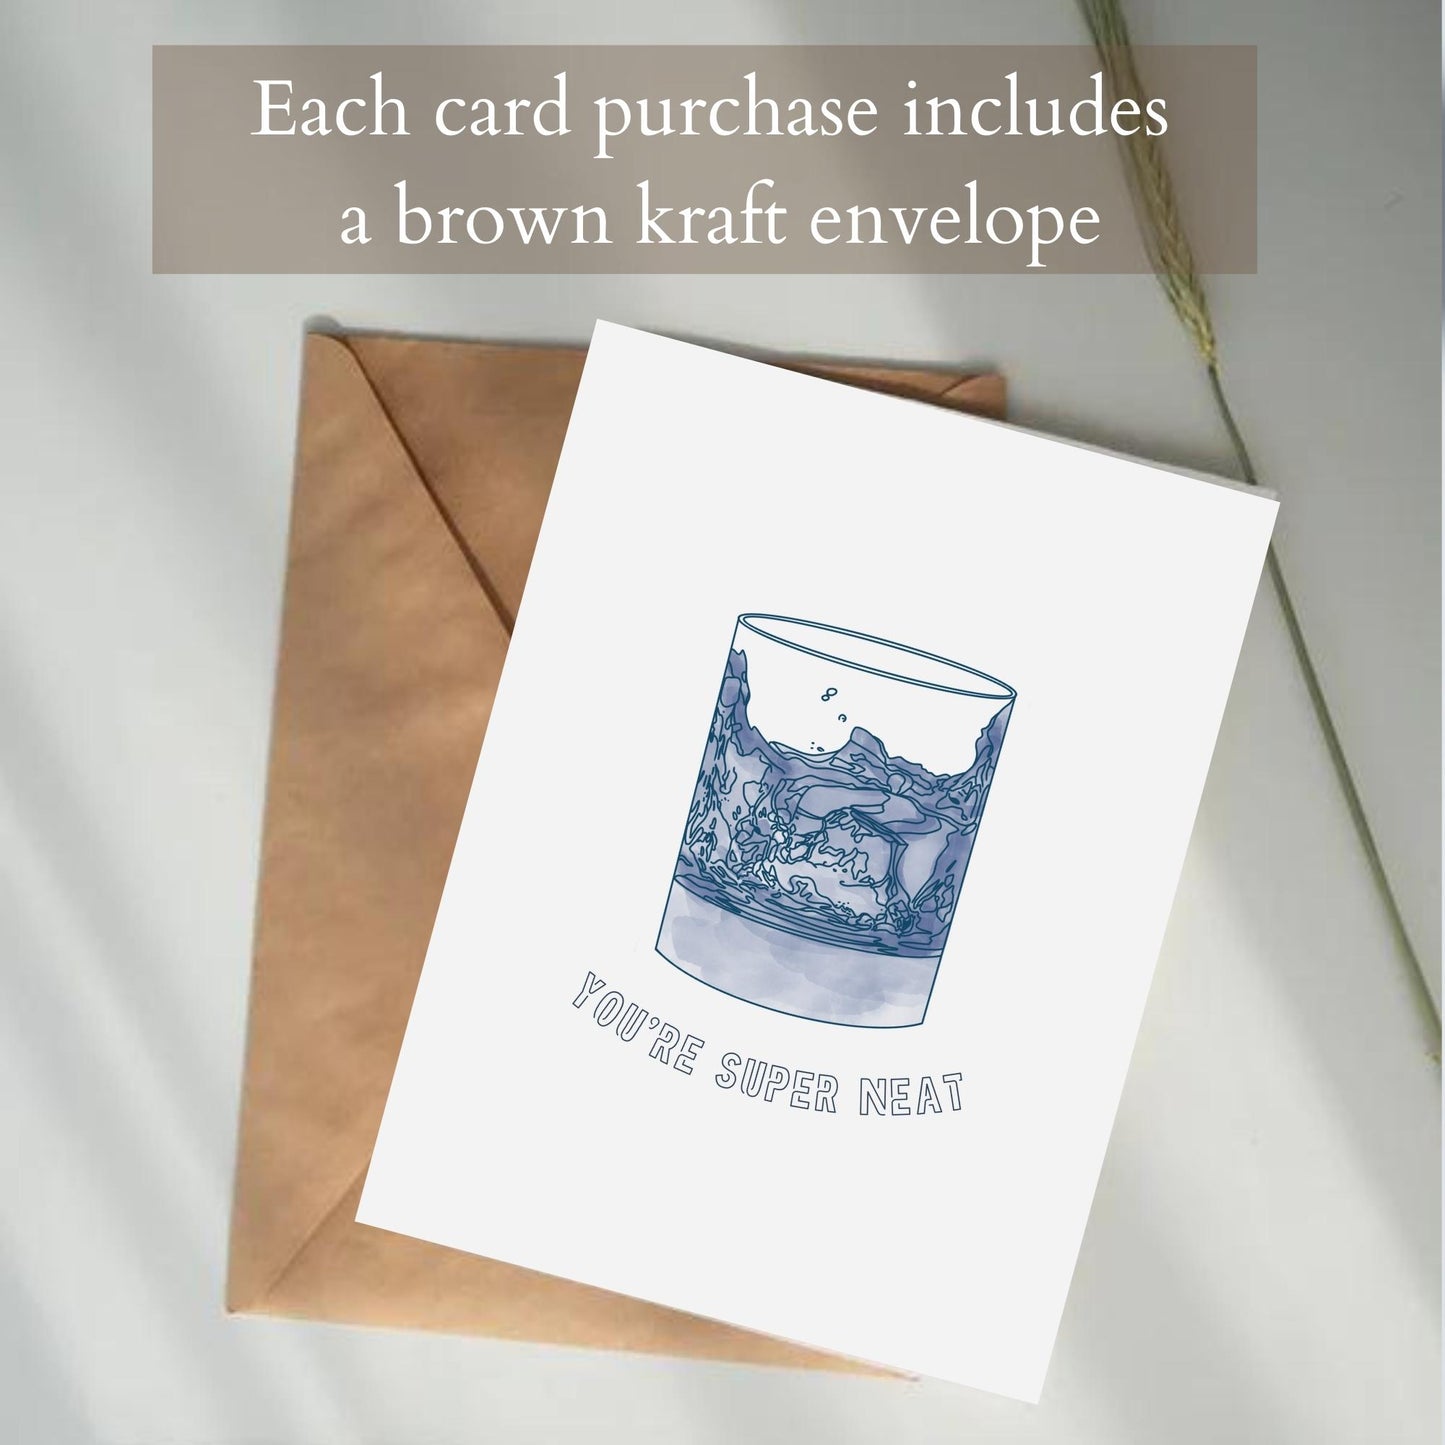 each card purchase includes a brown kraft envelope